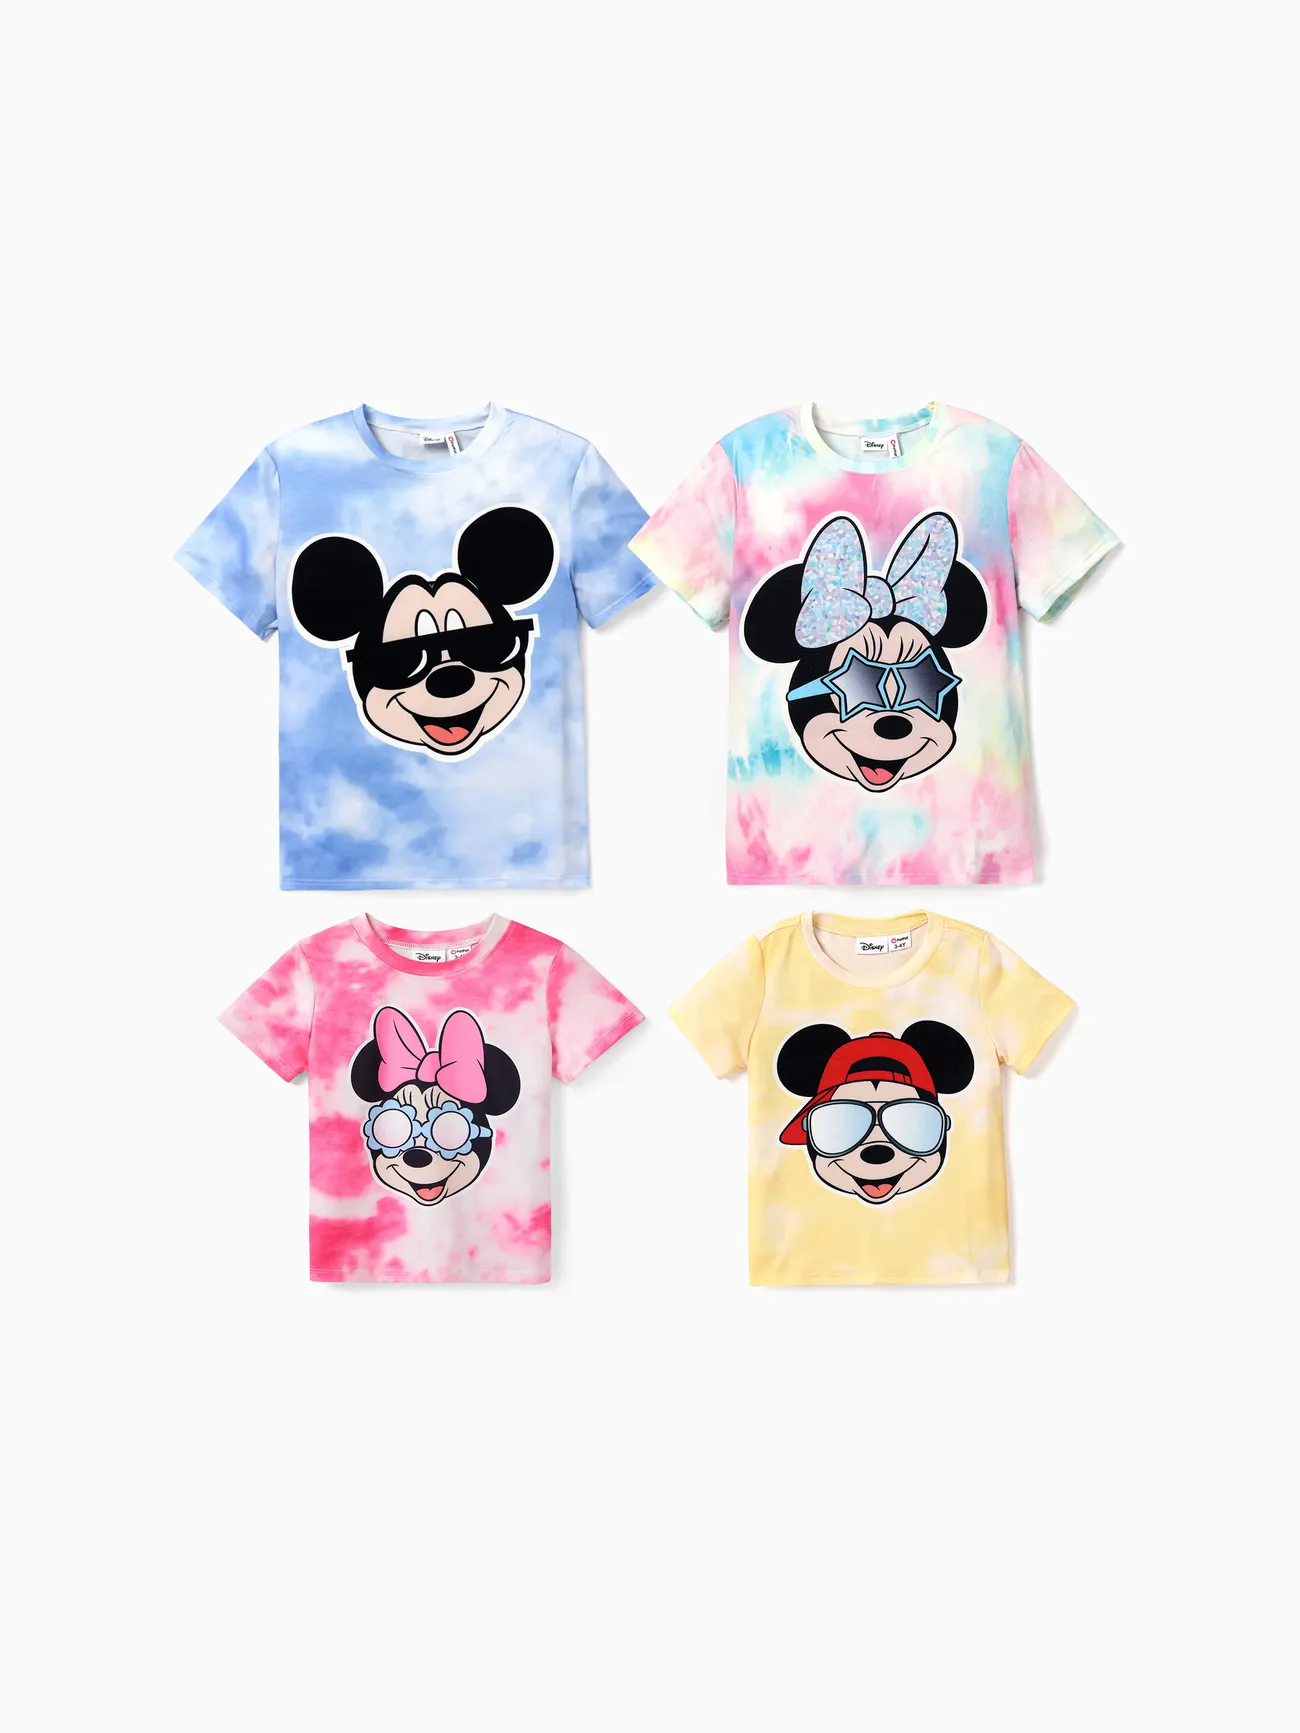 Disney Mickey and Friends Family Matching Character Print Short-sleeve T-shirt Pink big image 1